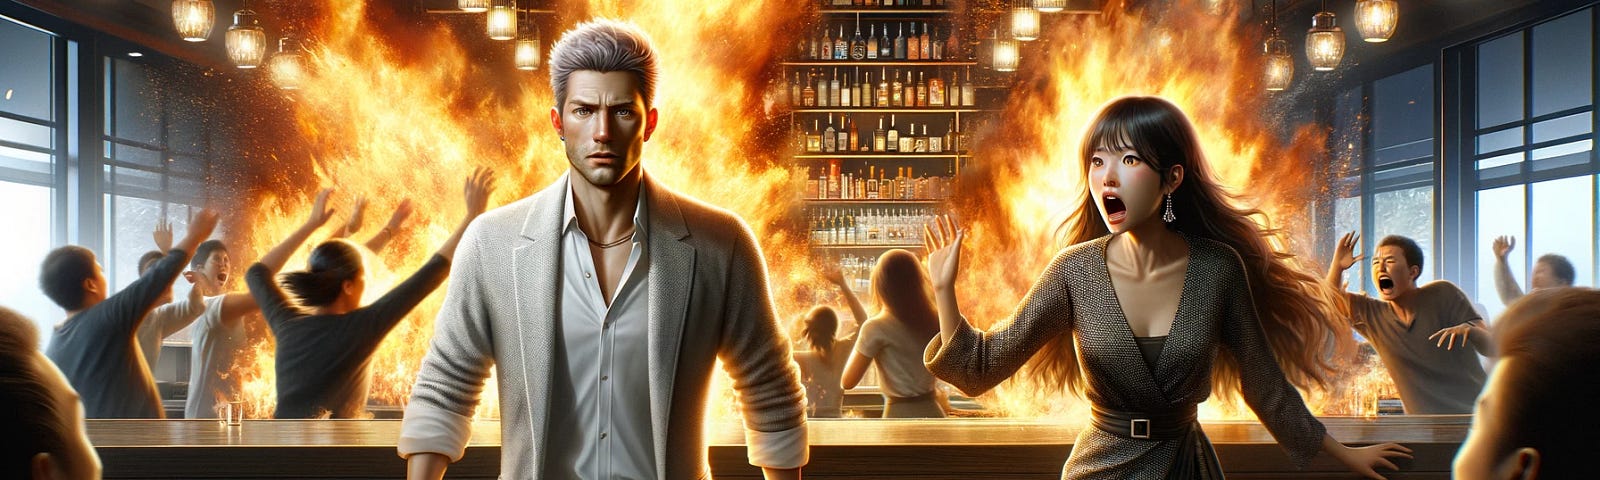 A man stands like an action hero in front of a fire that has broken out in the bar while his date screams